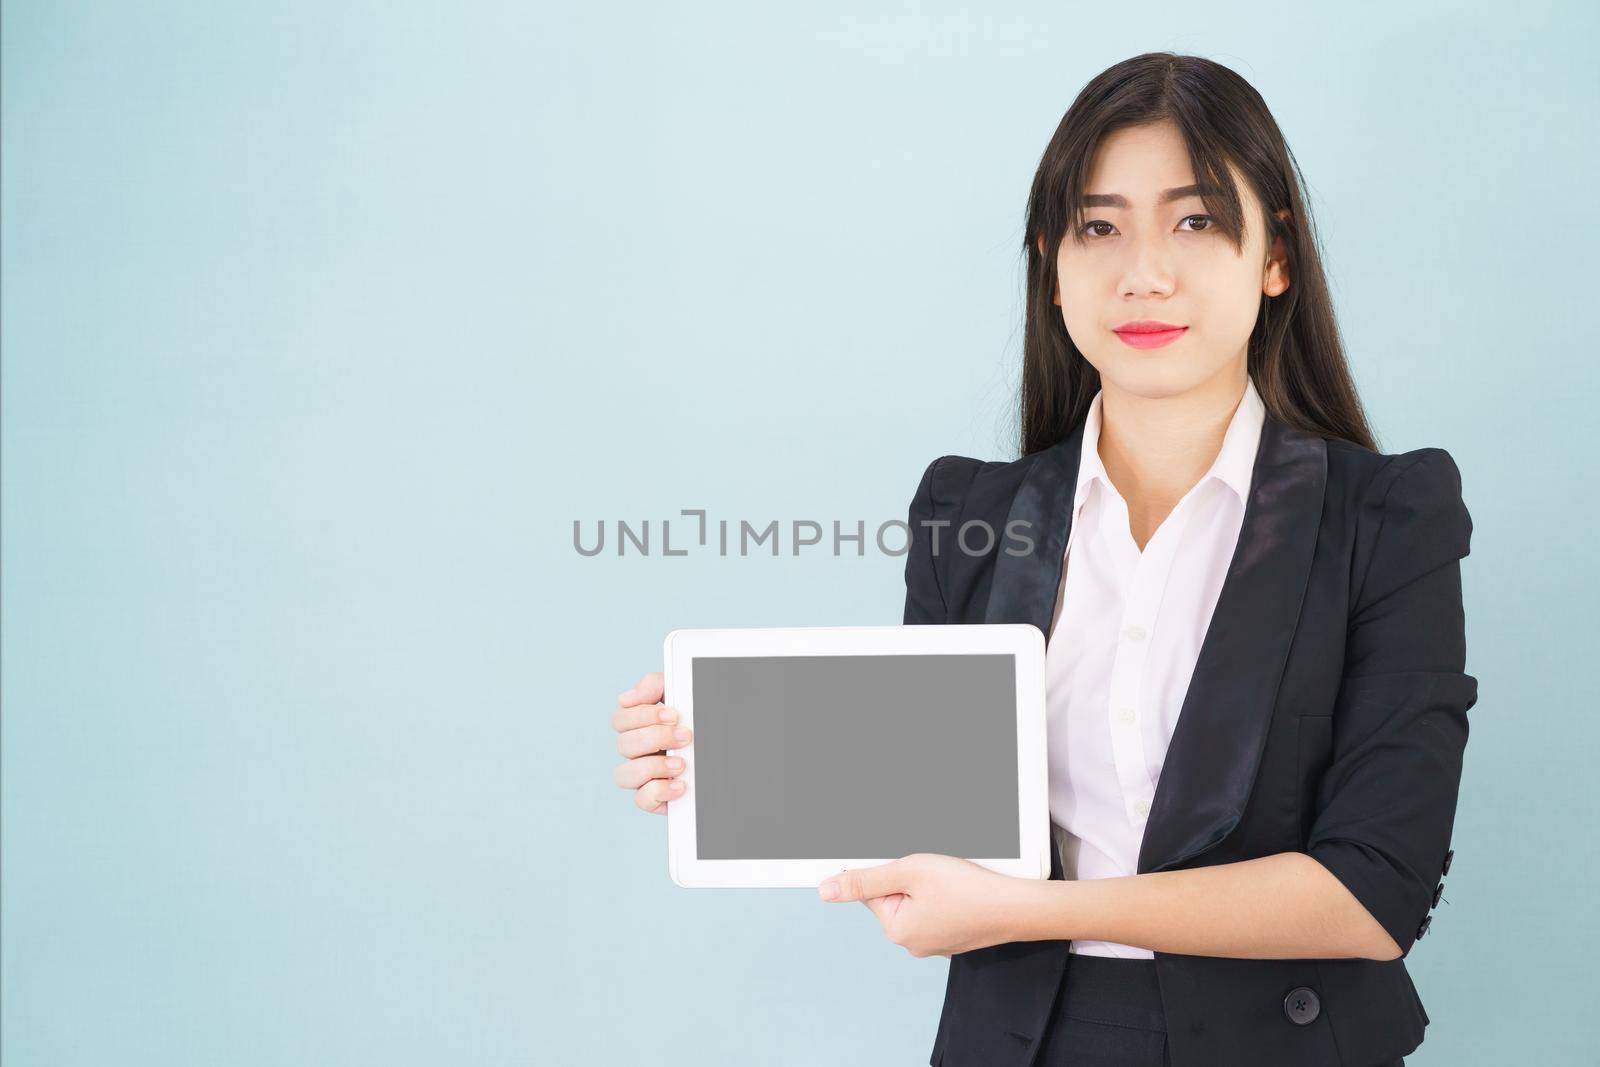 Young women in suit holding her digital tablet standing against blue background